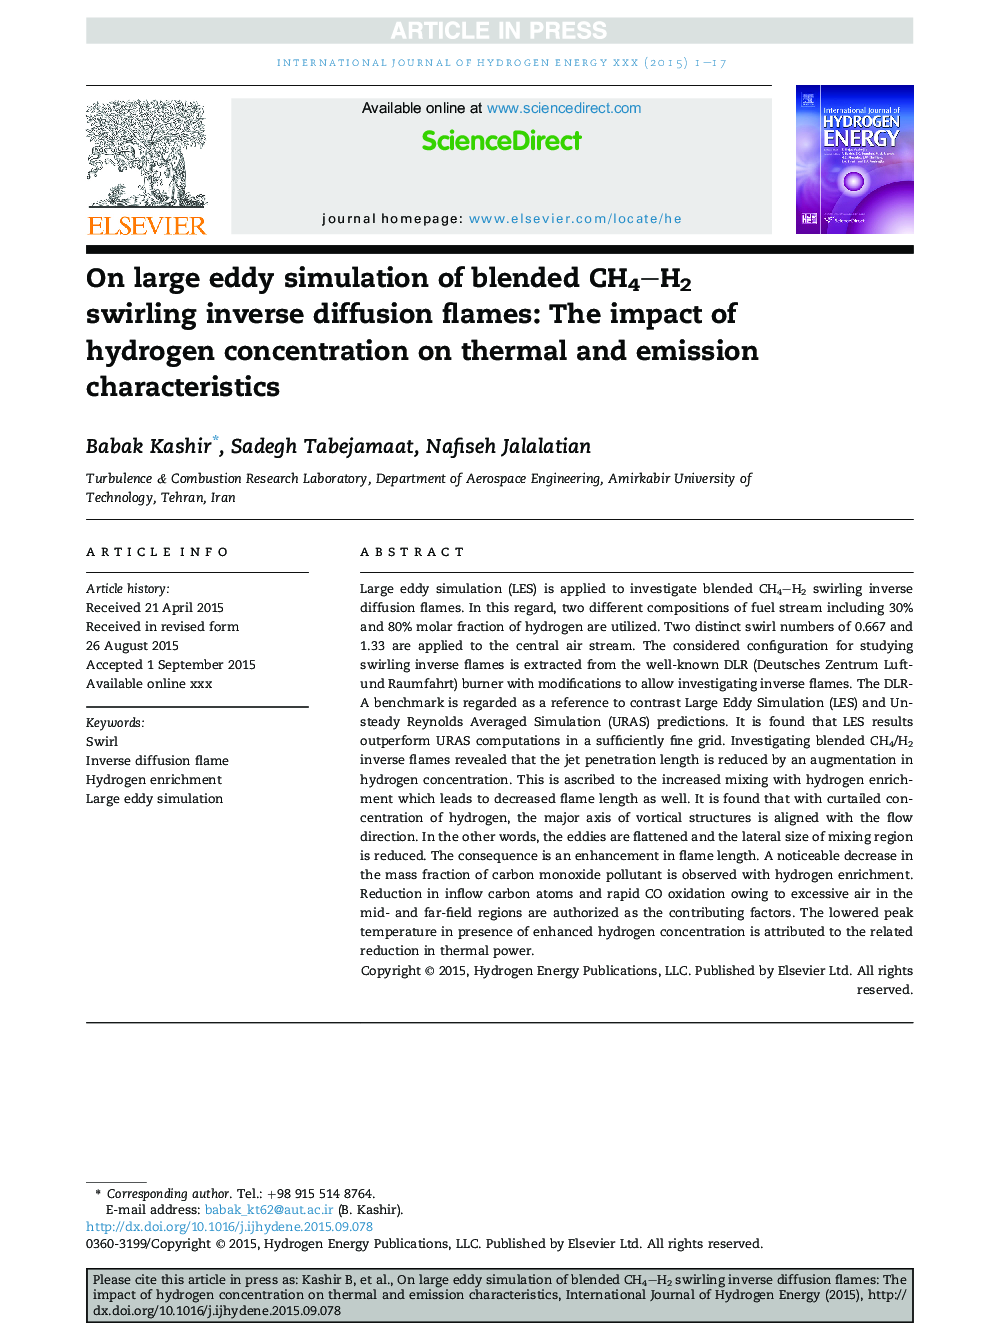 On large eddy simulation of blended CH4-H2 swirling inverse diffusion flames: The impact of hydrogen concentration on thermal and emission characteristics